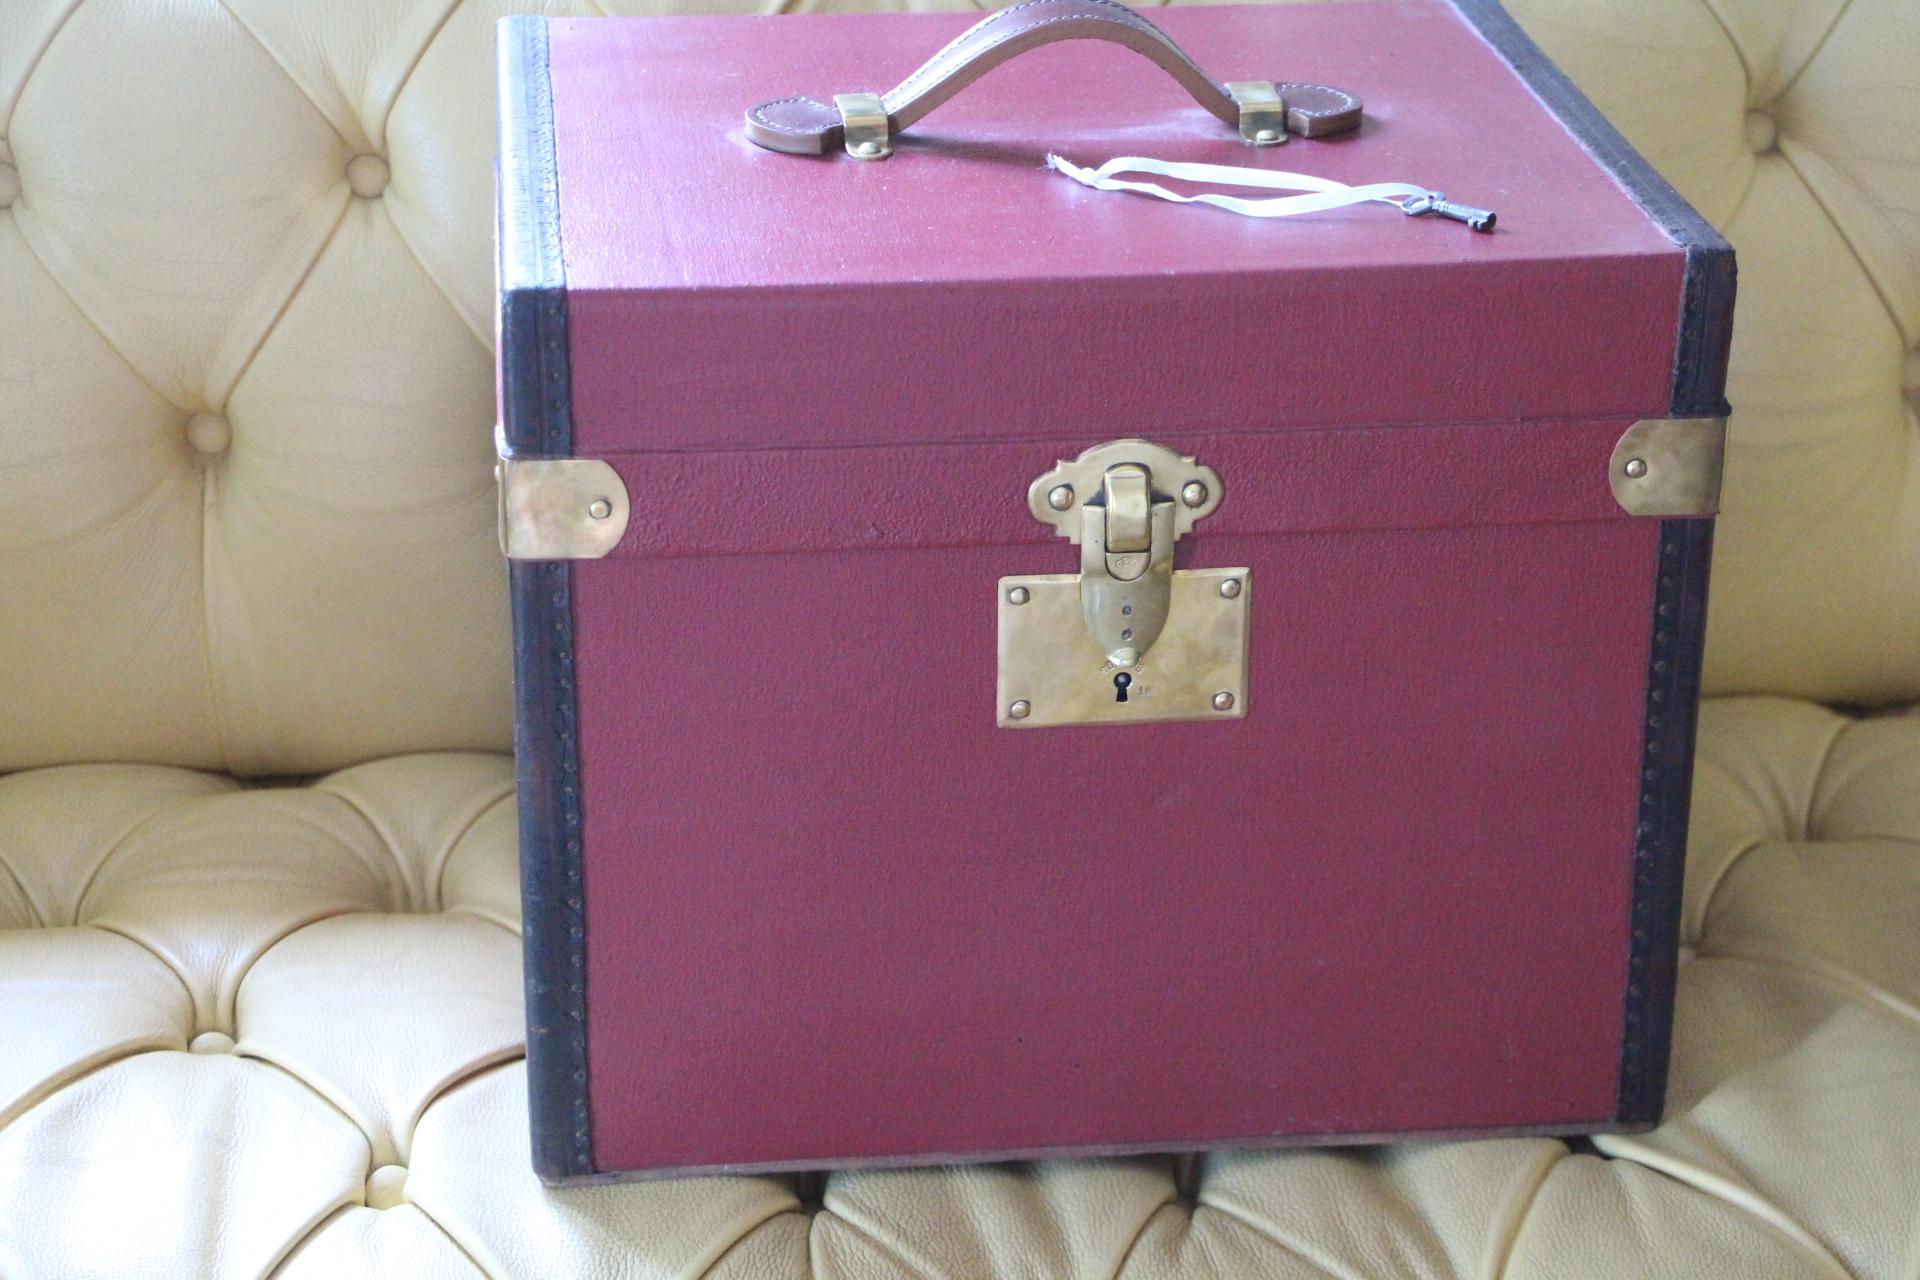 This very nice red canvas and leather hat box features leather trim and leather top handle as well as solid brass locks,clasps and studs.It still has got its working key.
It is very elegant and it has got a very rich and warm patina.
Its interior